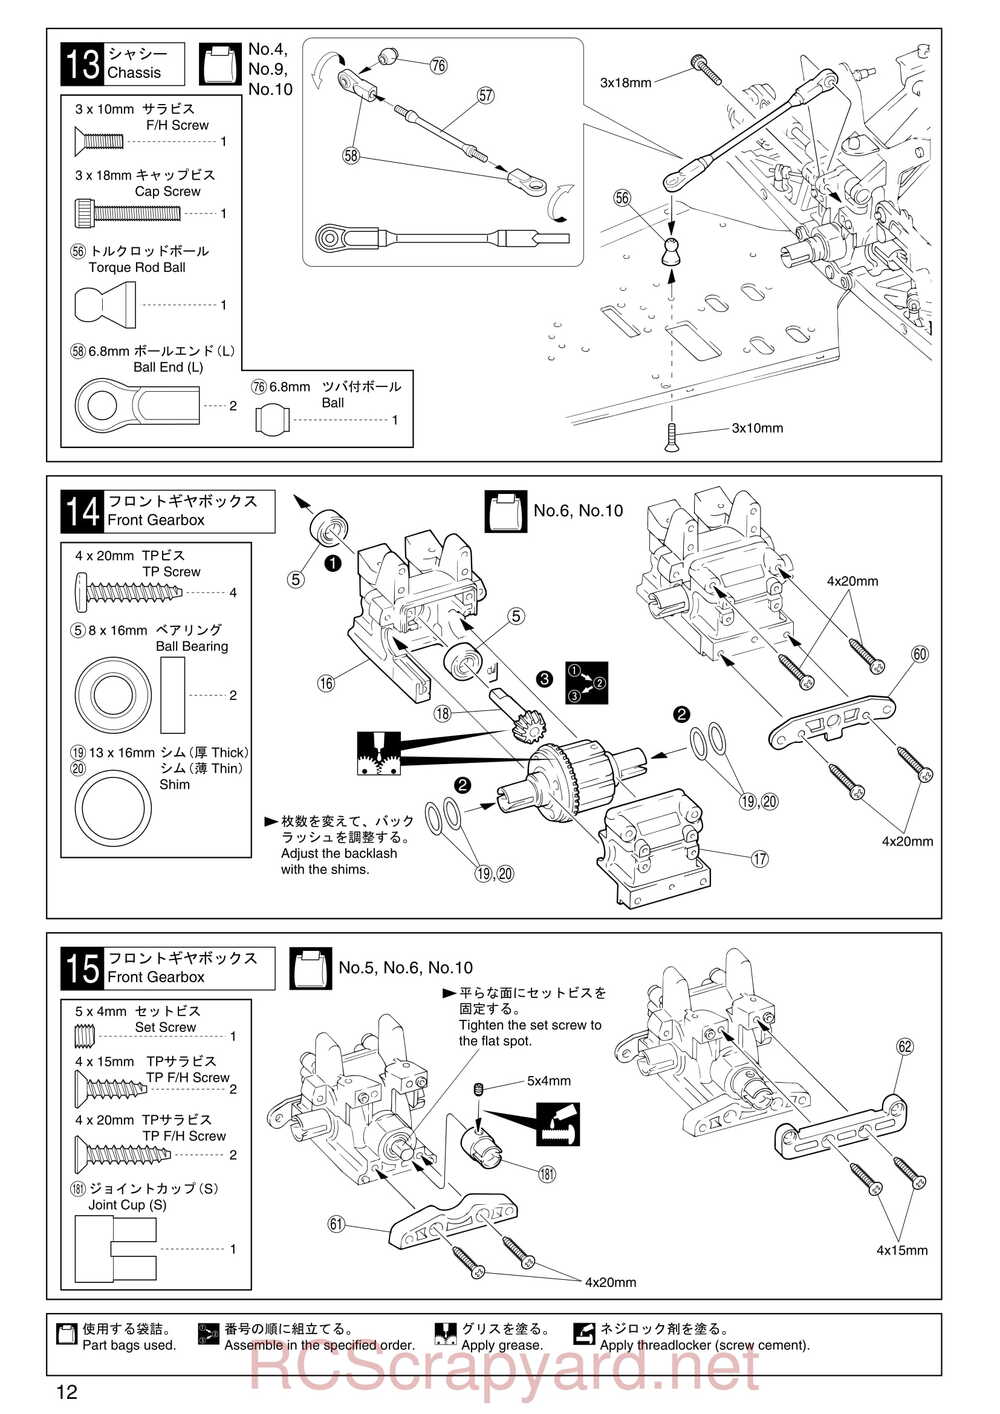 Kyosho - 31081- Inferno-MP-7-5 - Manual - Page 12